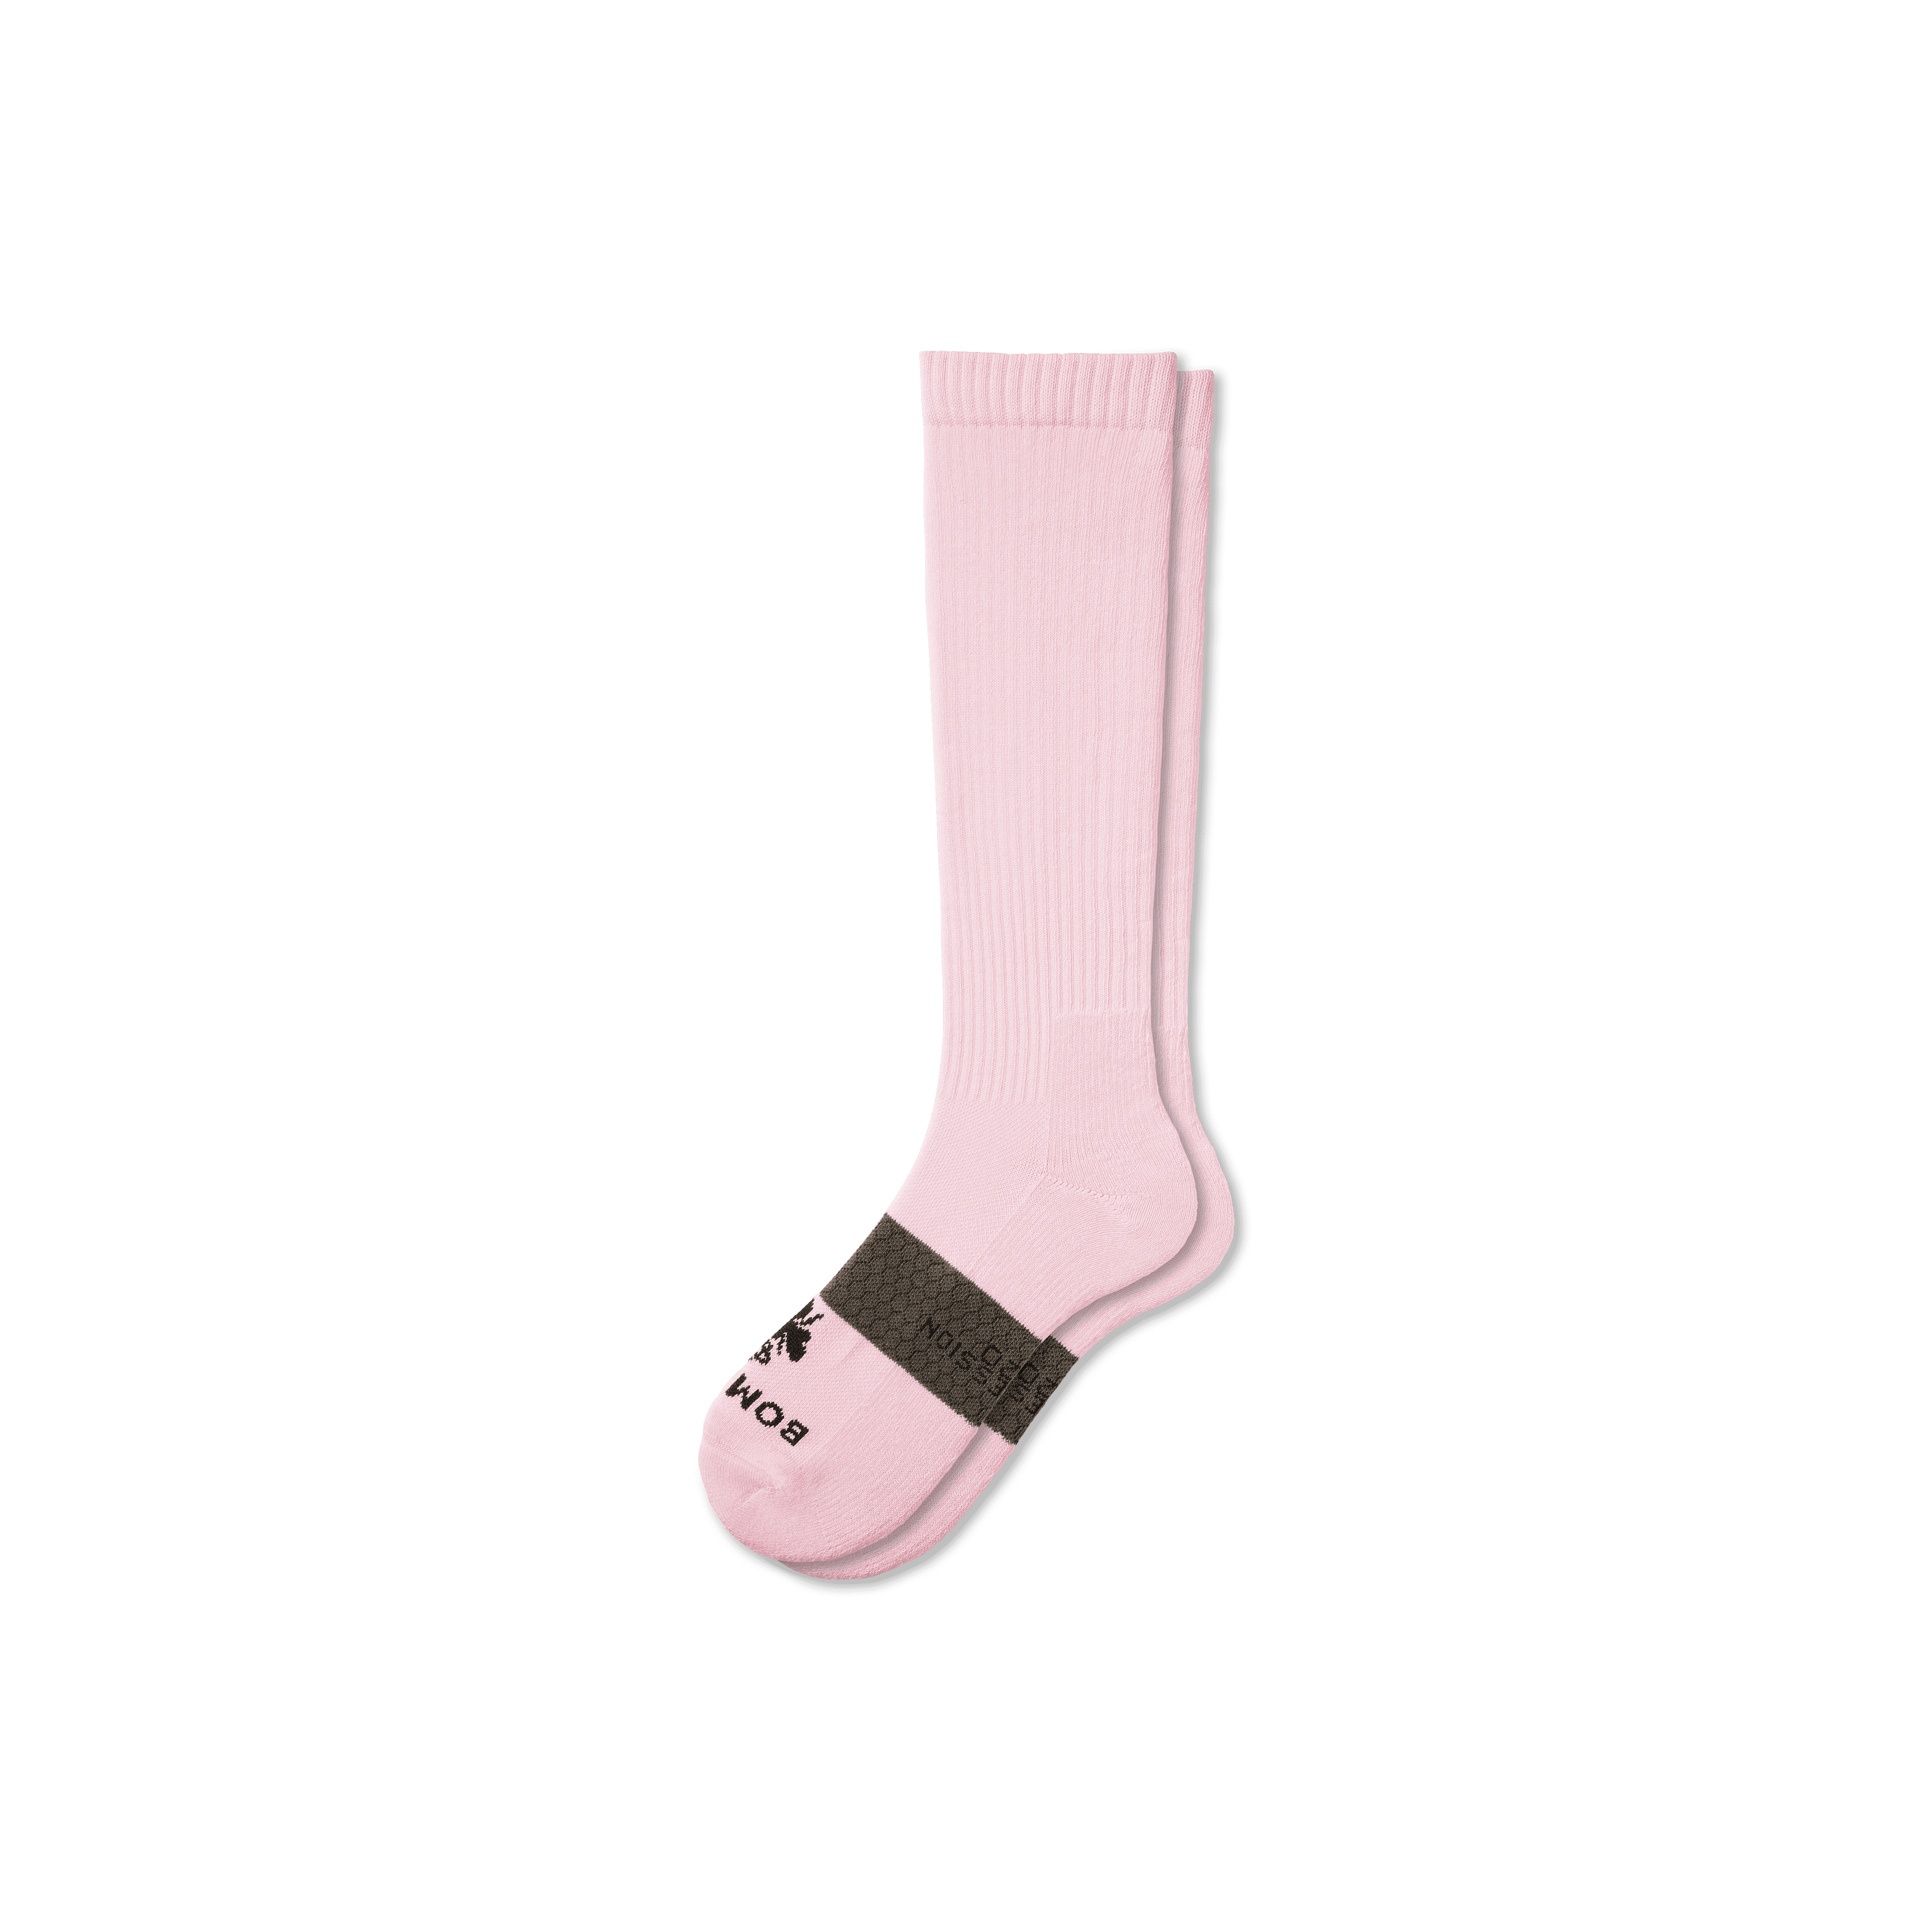 Bombas Everyday Compression Socks (15-20mmhg) In Pink Pearl